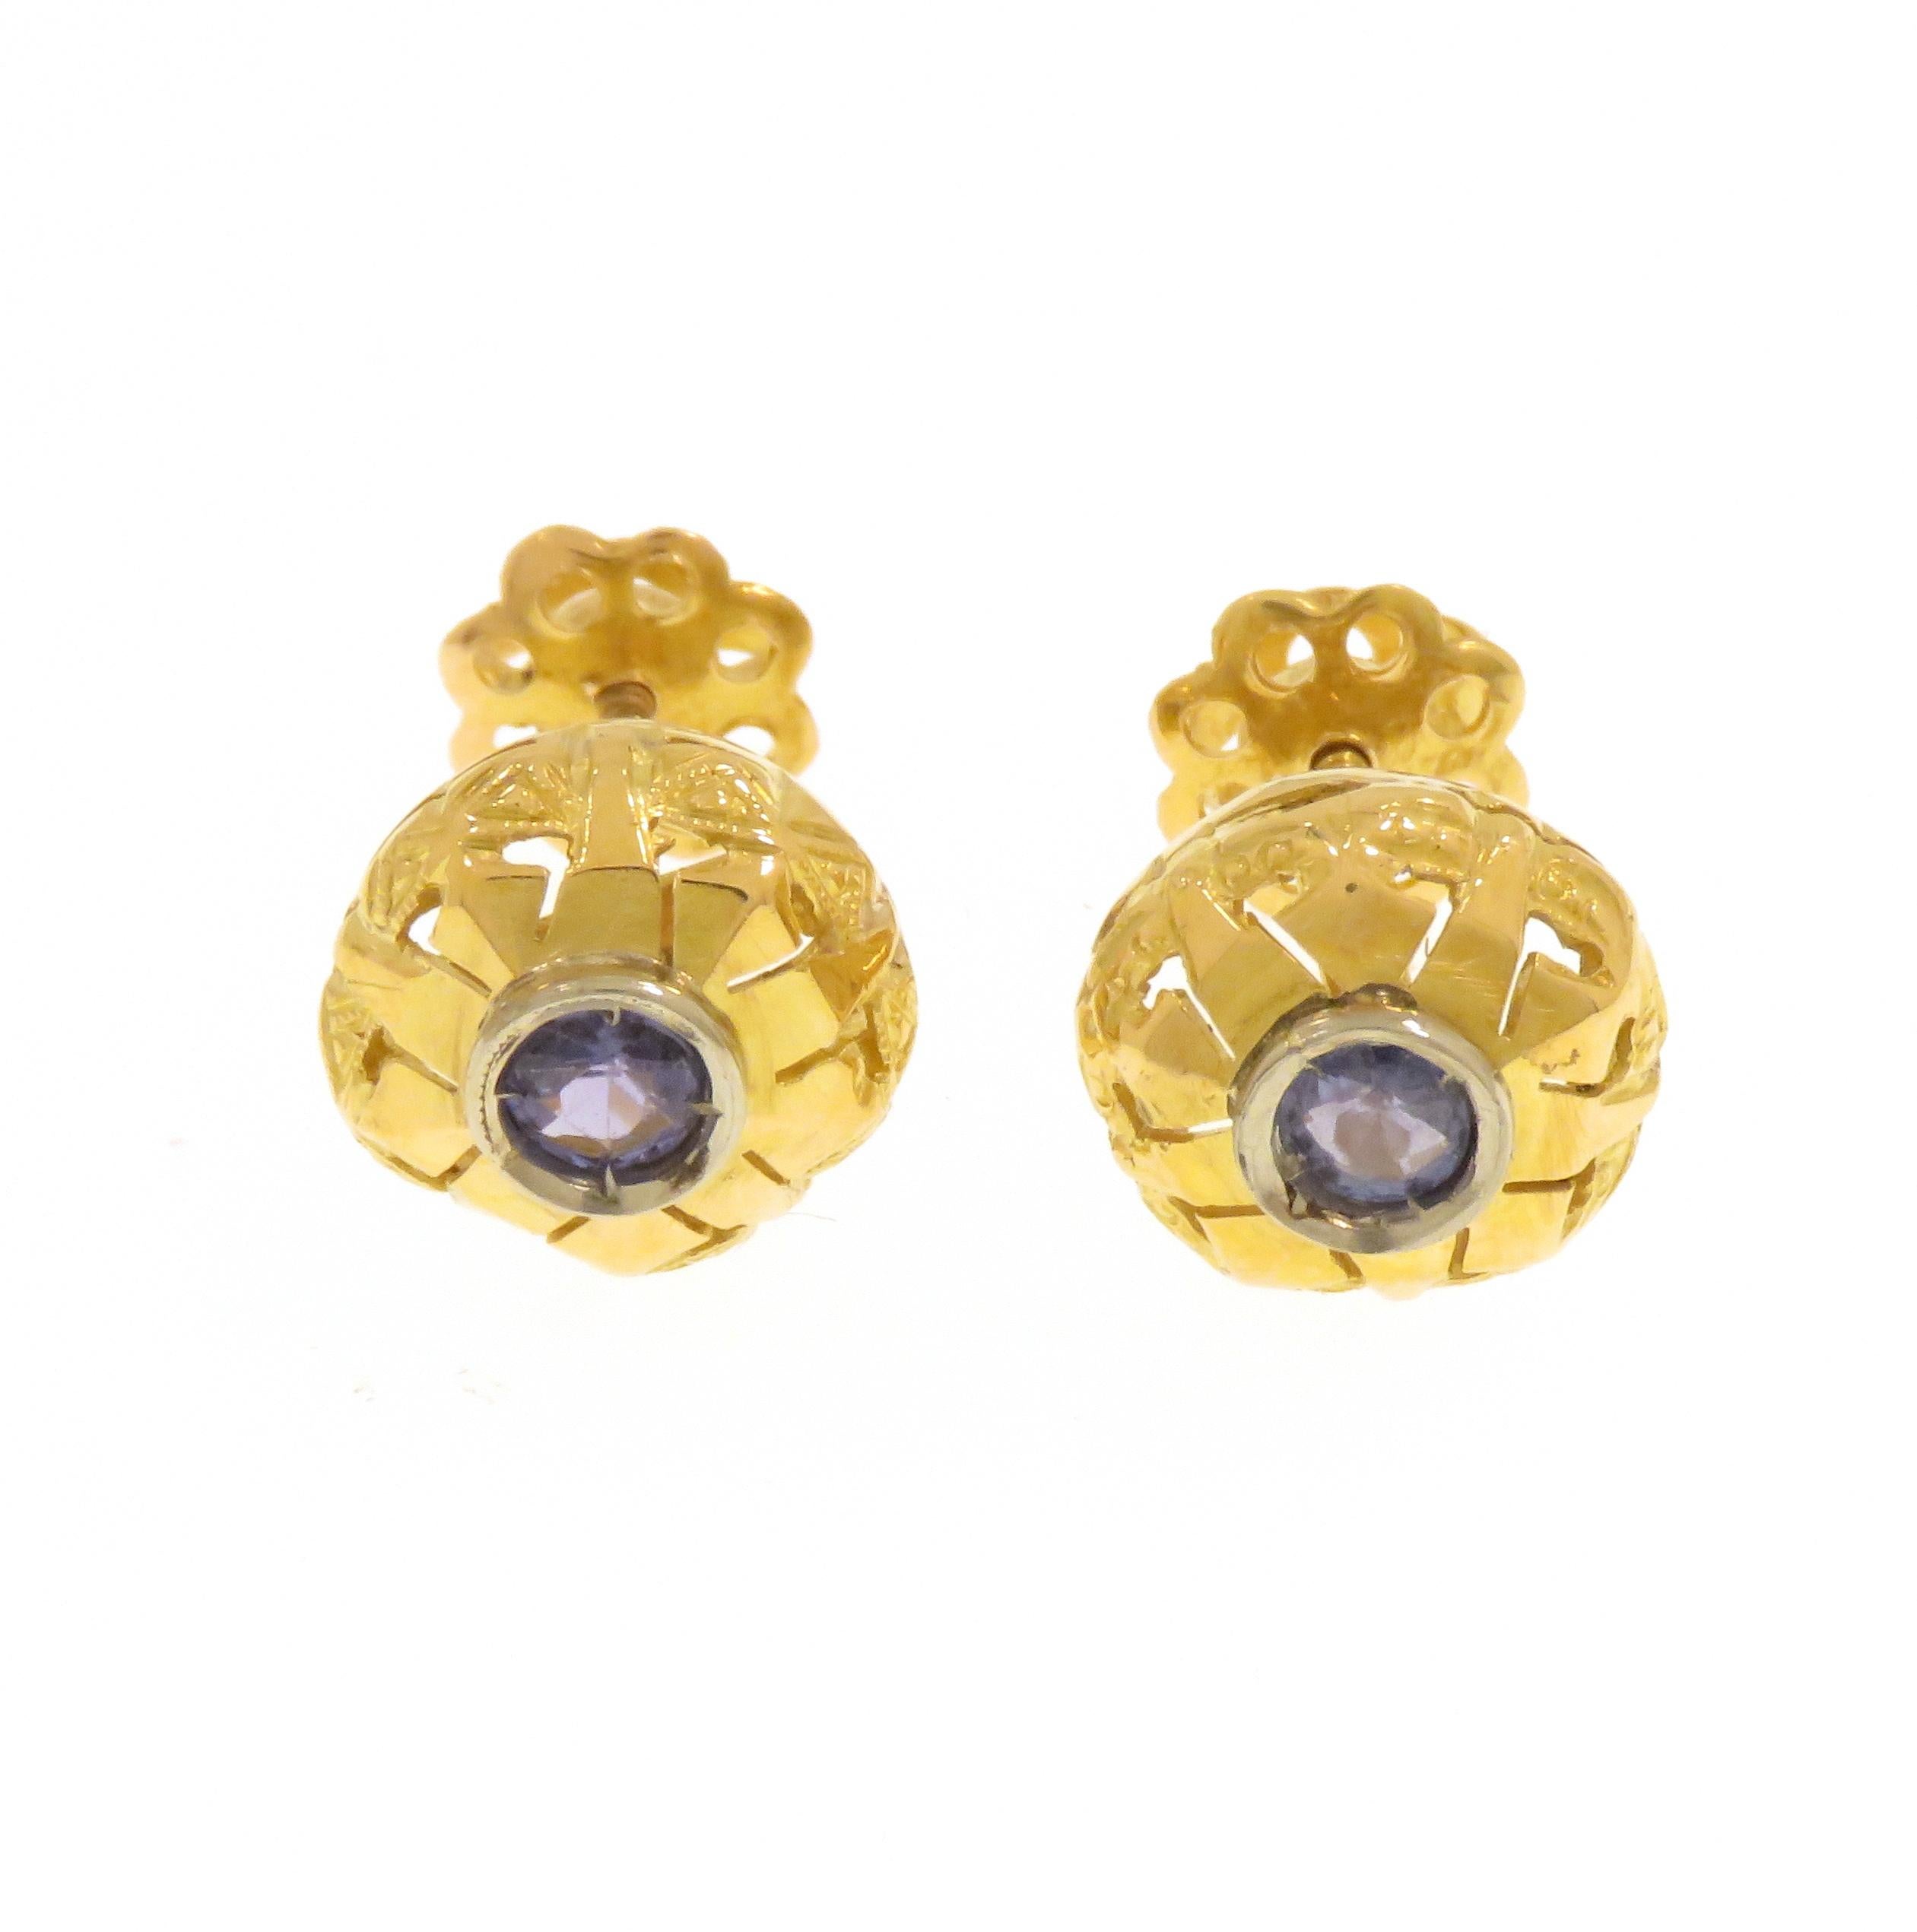 Beautiful authentic antique bombé stud earrings with brilliant cut blue sapphires. Handcrafted in 18 karat yellow gold. Marked with the Gold Mark 750.

Crafted in: 18 karat yellow gold.
2 brilliant cut sapphires: 0.40 circa ctw. 
Total weight of